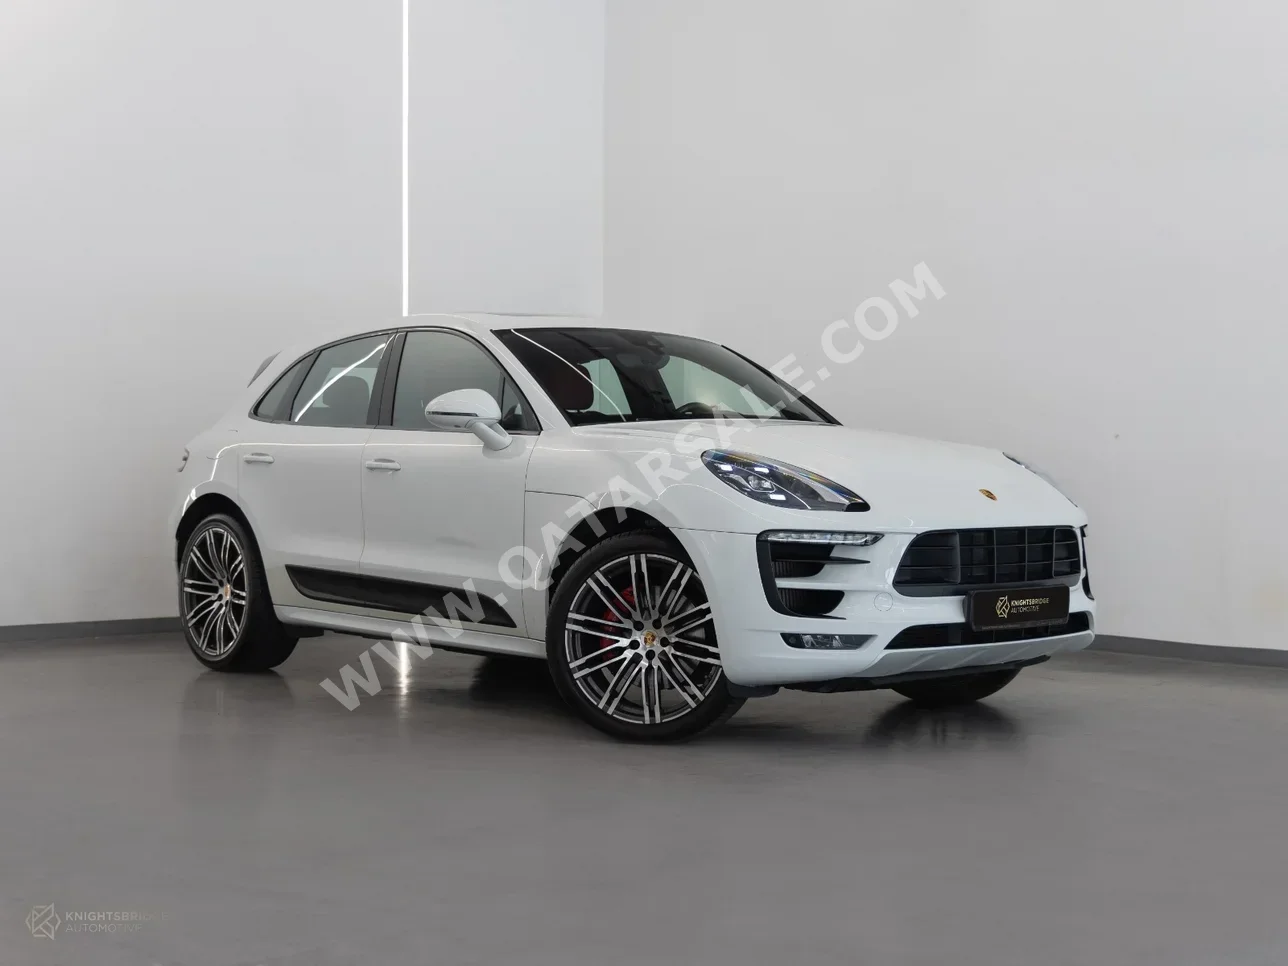 Porsche  Macan  GTS  2017  Automatic  32,400 Km  4 Cylinder  Four Wheel Drive (4WD)  SUV  White